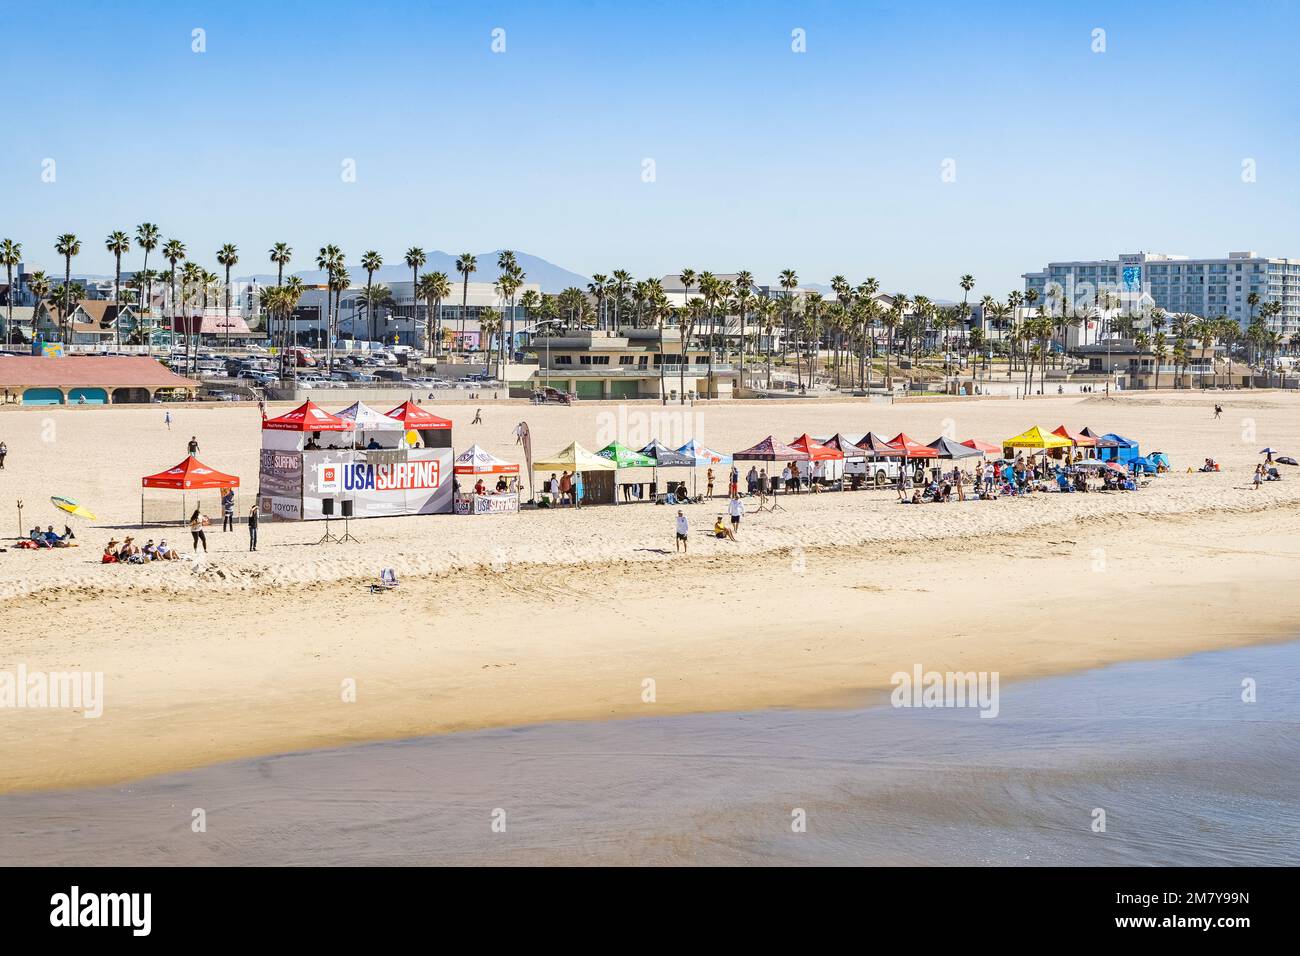 USA Surfing Prime taking place in Huntington Beach, California Stock Photo